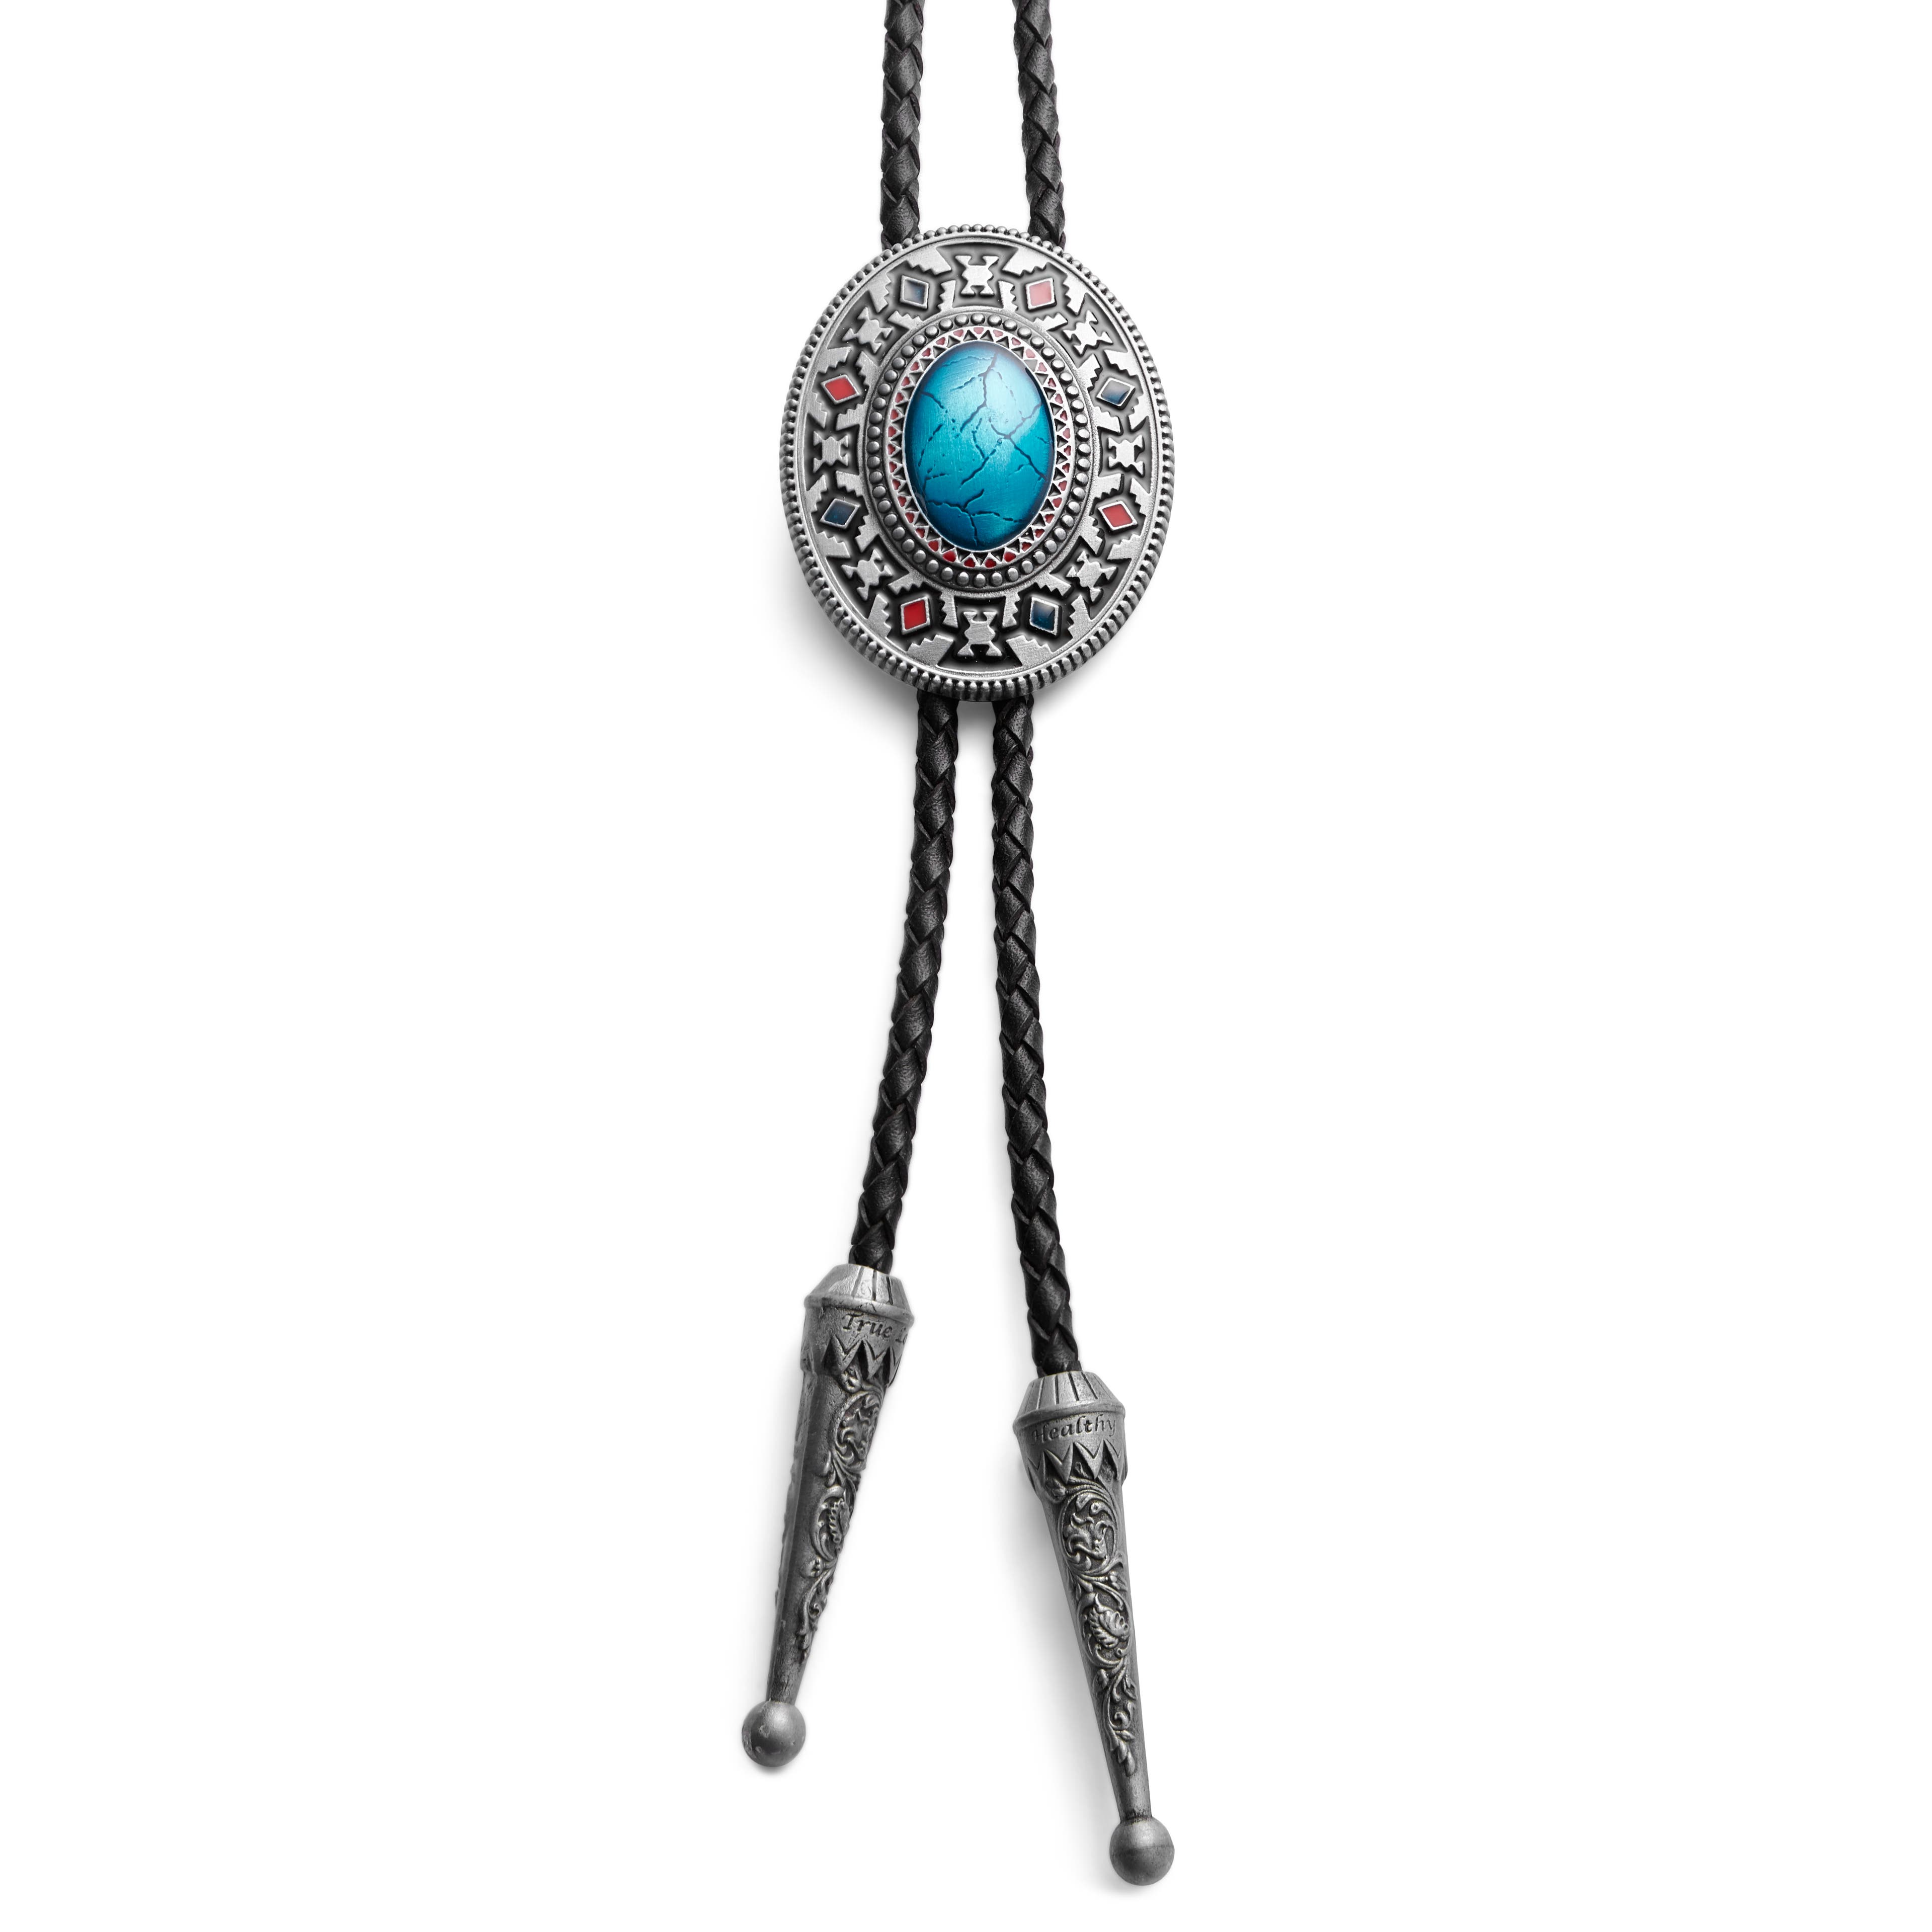 Turquoise Stone Adjustable Braided Leather Bolo Tie